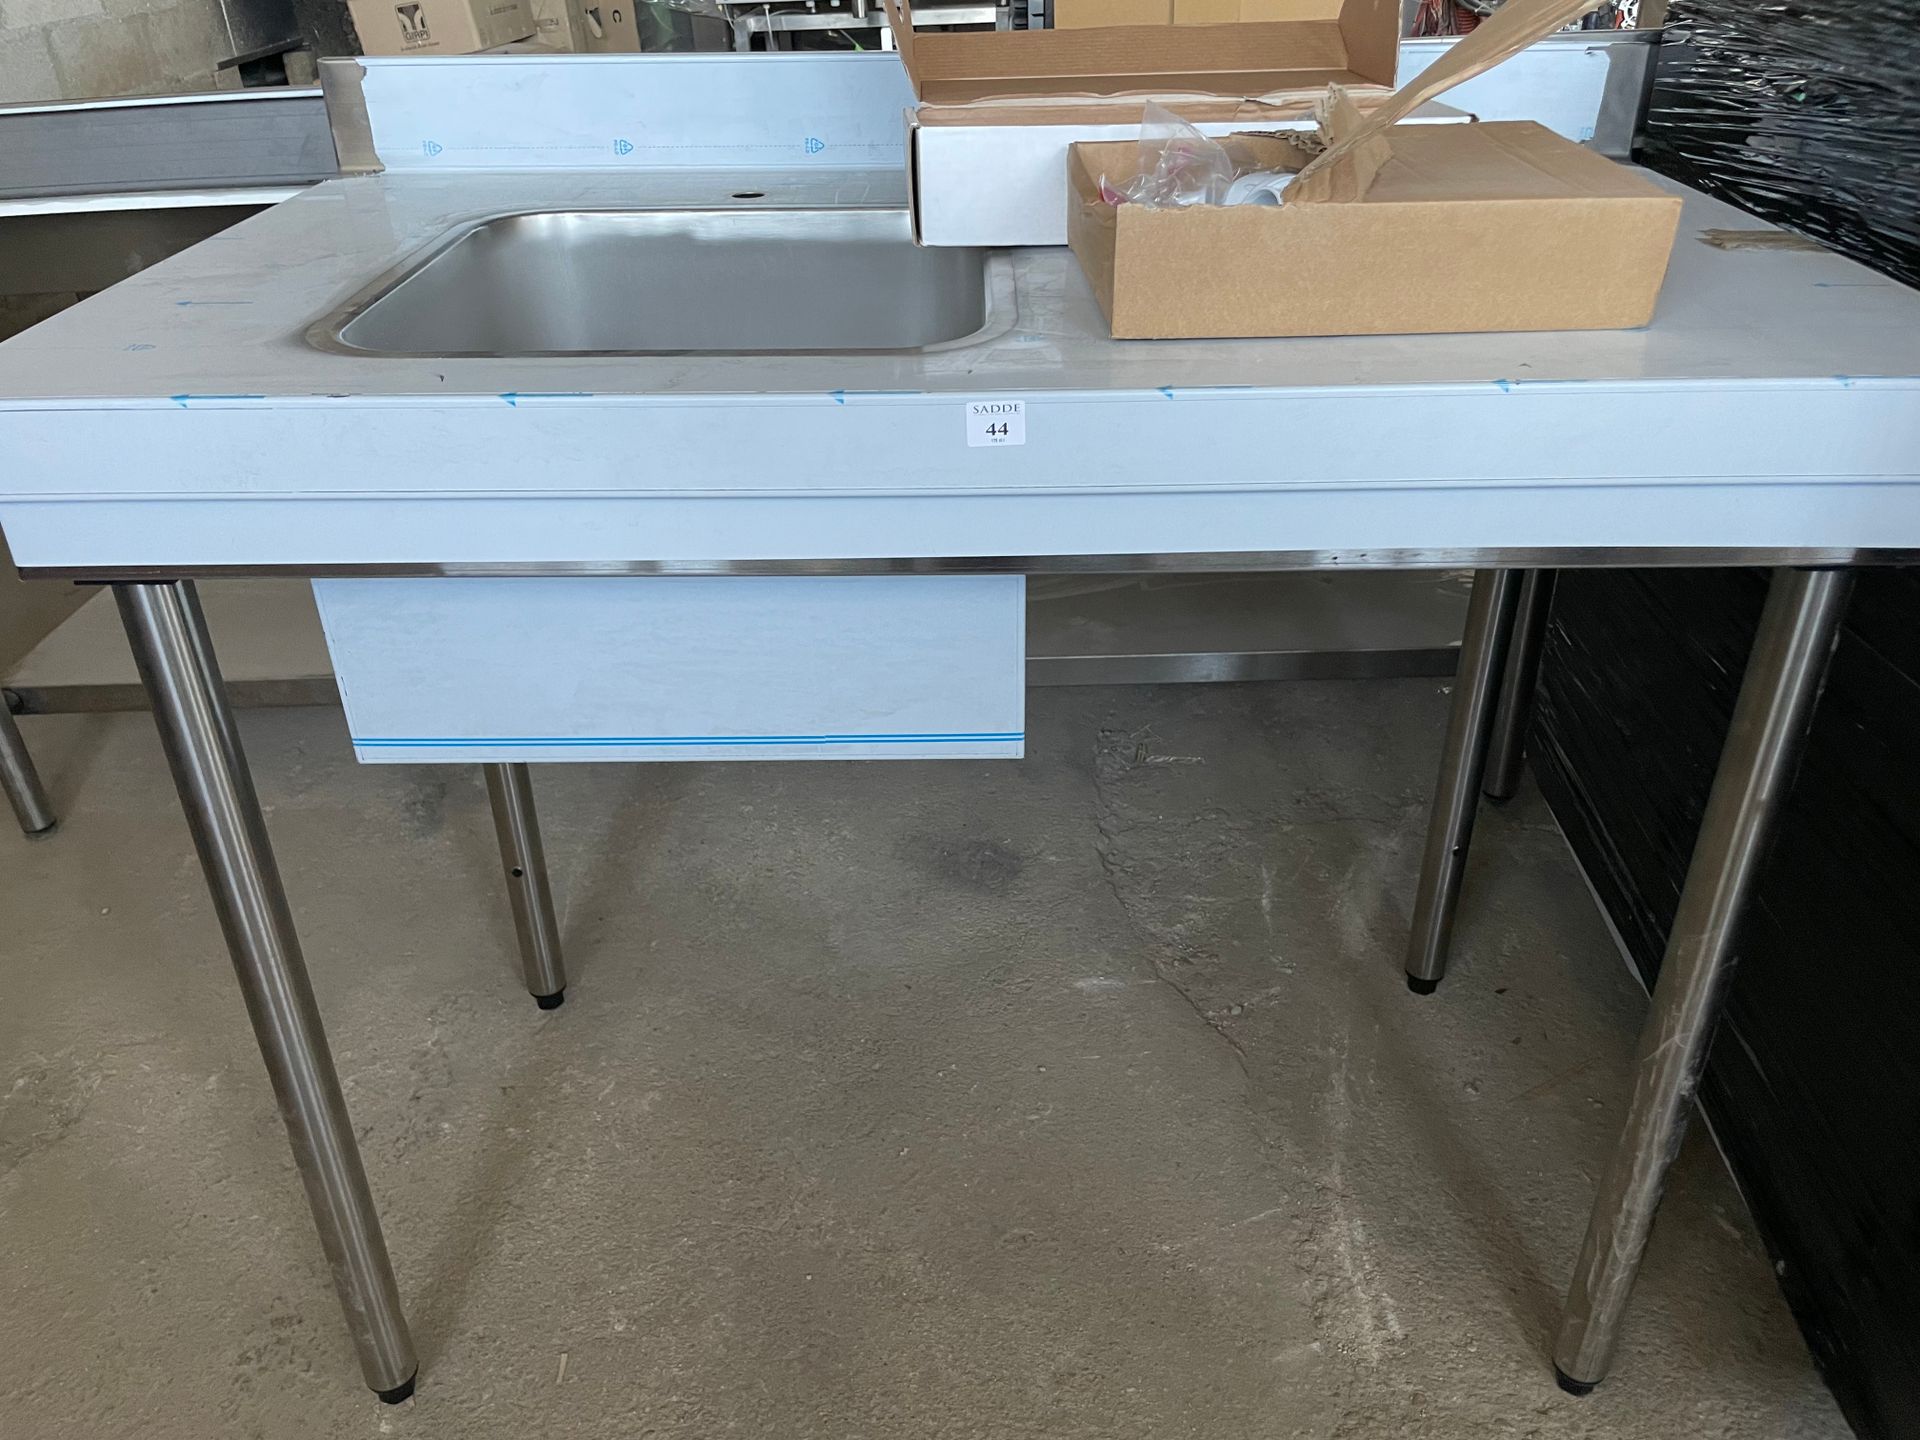 Null BONNET THIRODE. Chef's table with tray on the left. 1200x700mm.

With tapwa&hellip;